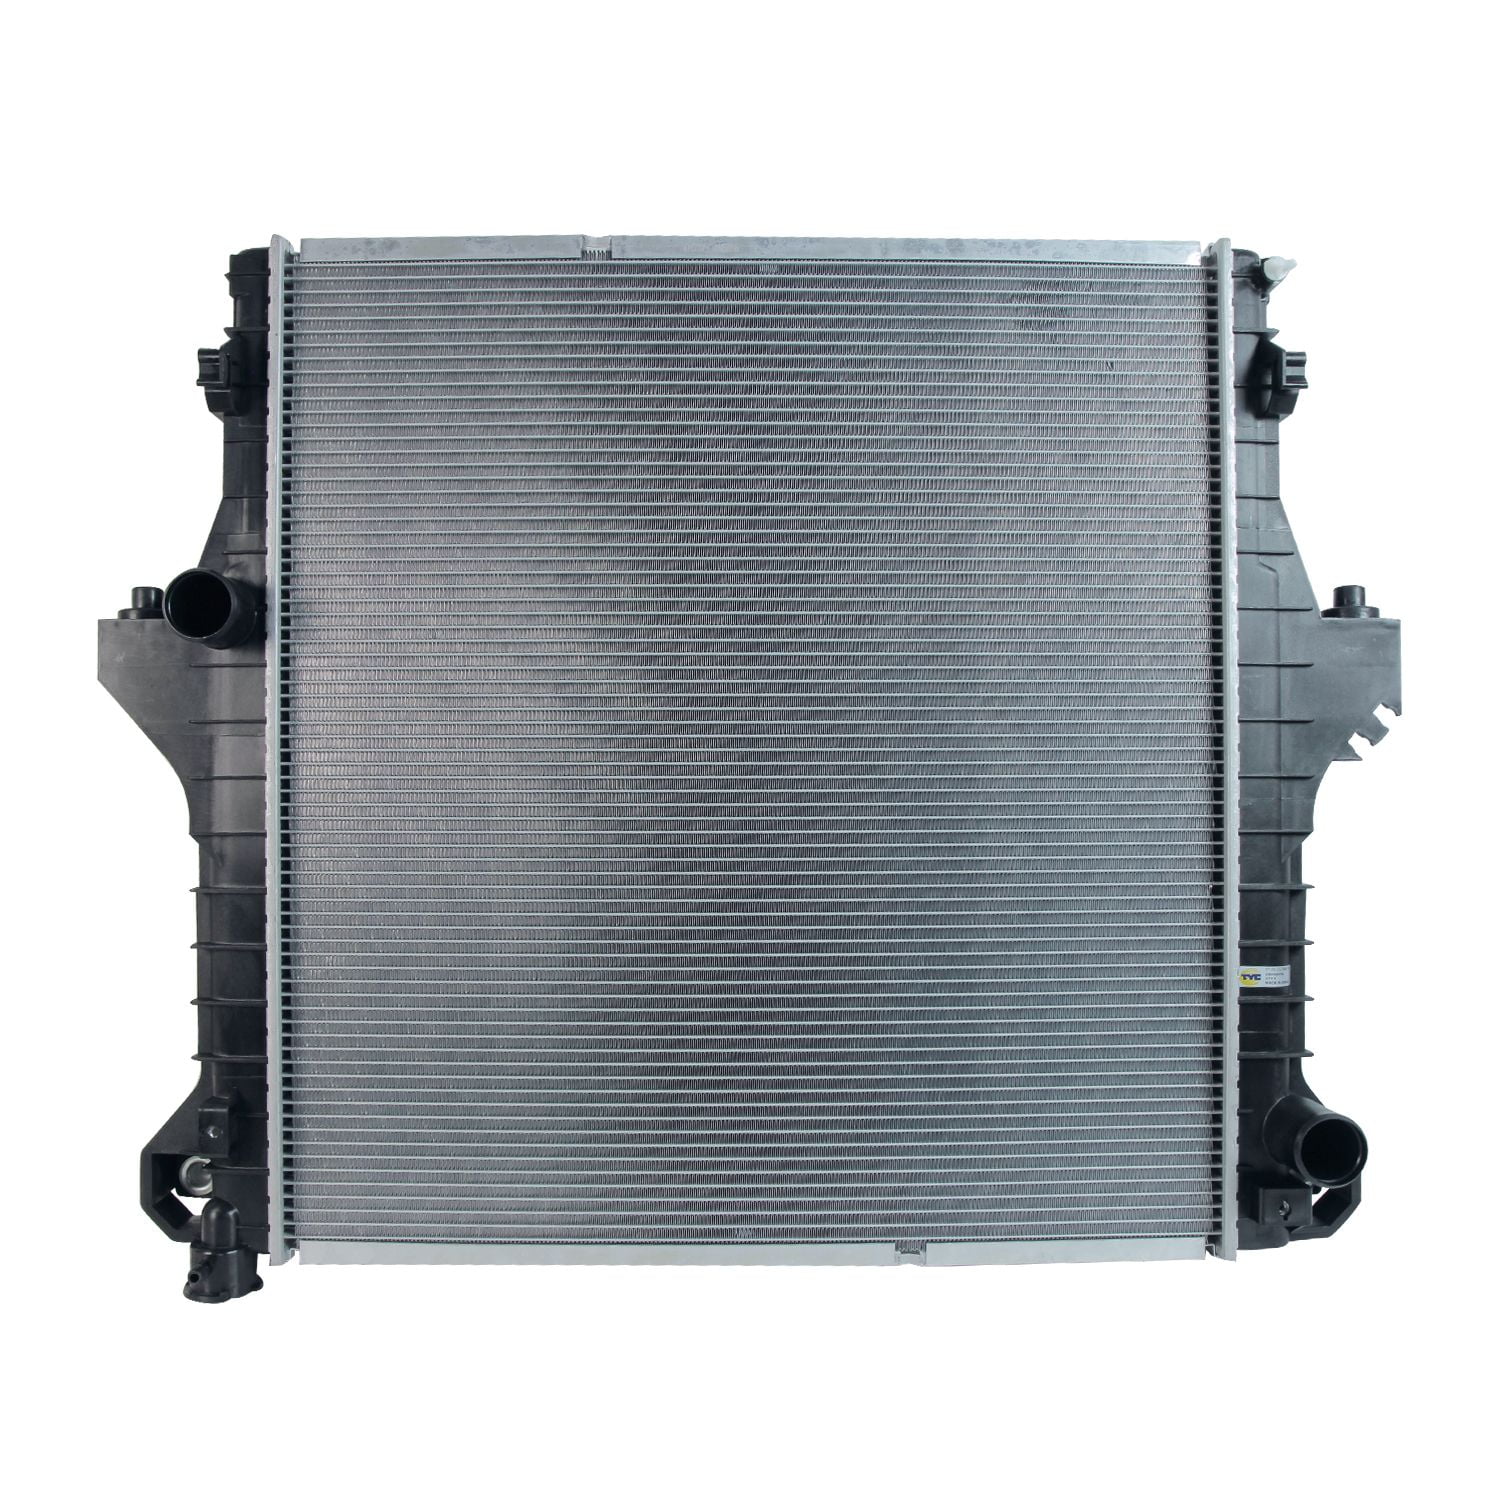 Radiator For 09-12 Ford Fits Escape 2.5l L4 Free Shipping